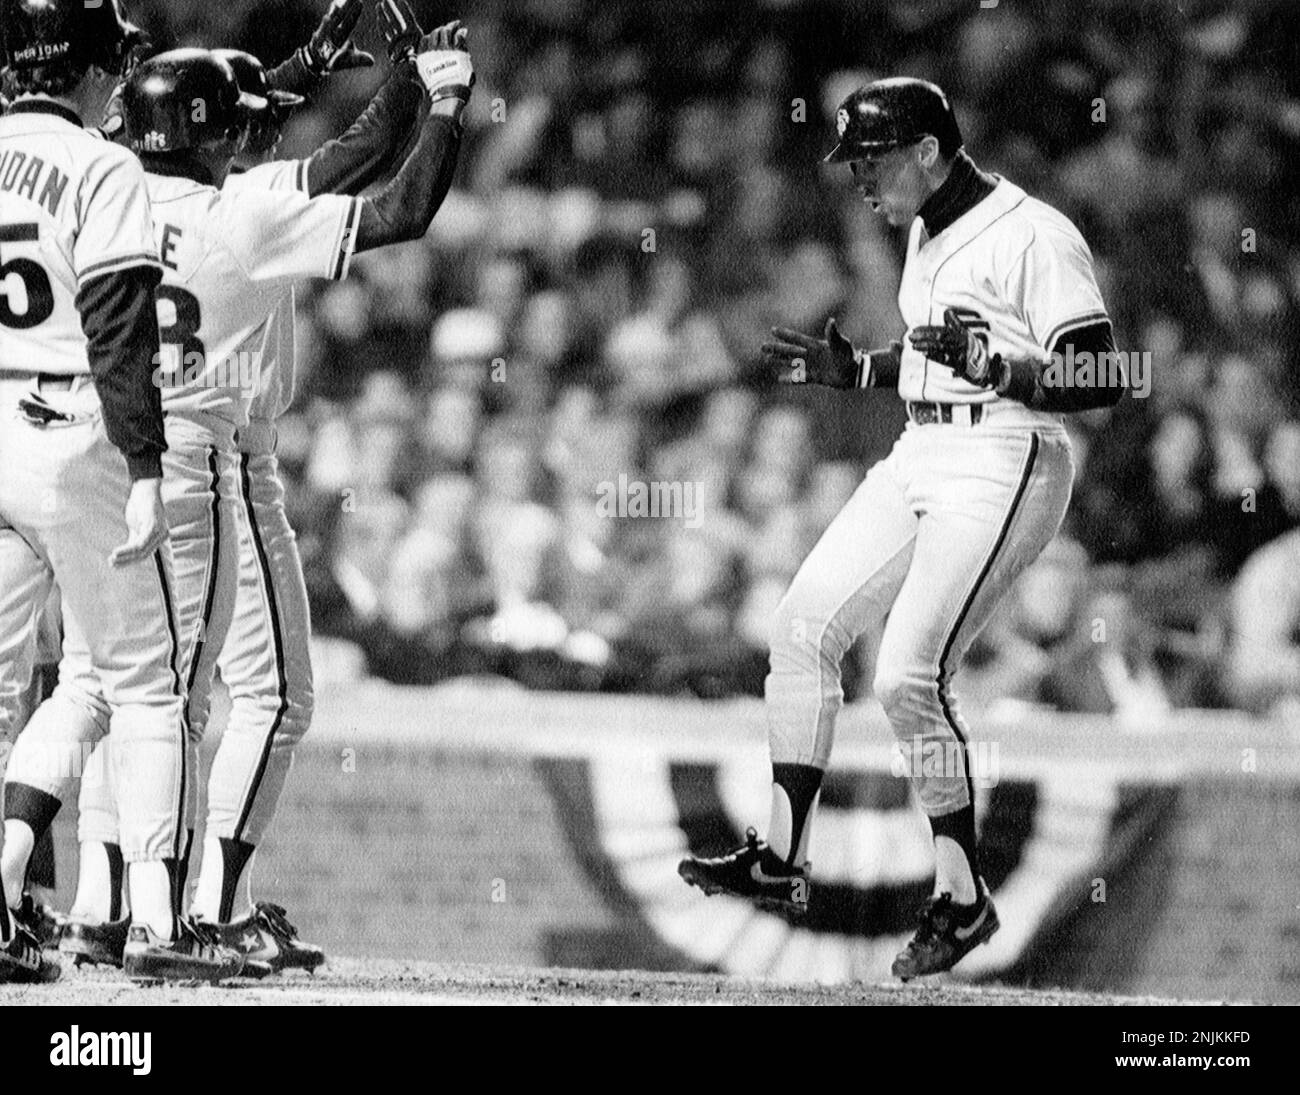 Will Clark hits a grand slam in NLCS playoff game against the Chicago Cubs  in Chicago, October 4, 1989 (Brant Ward/San Francisco Chronicle via AP  Stock Photo - Alamy